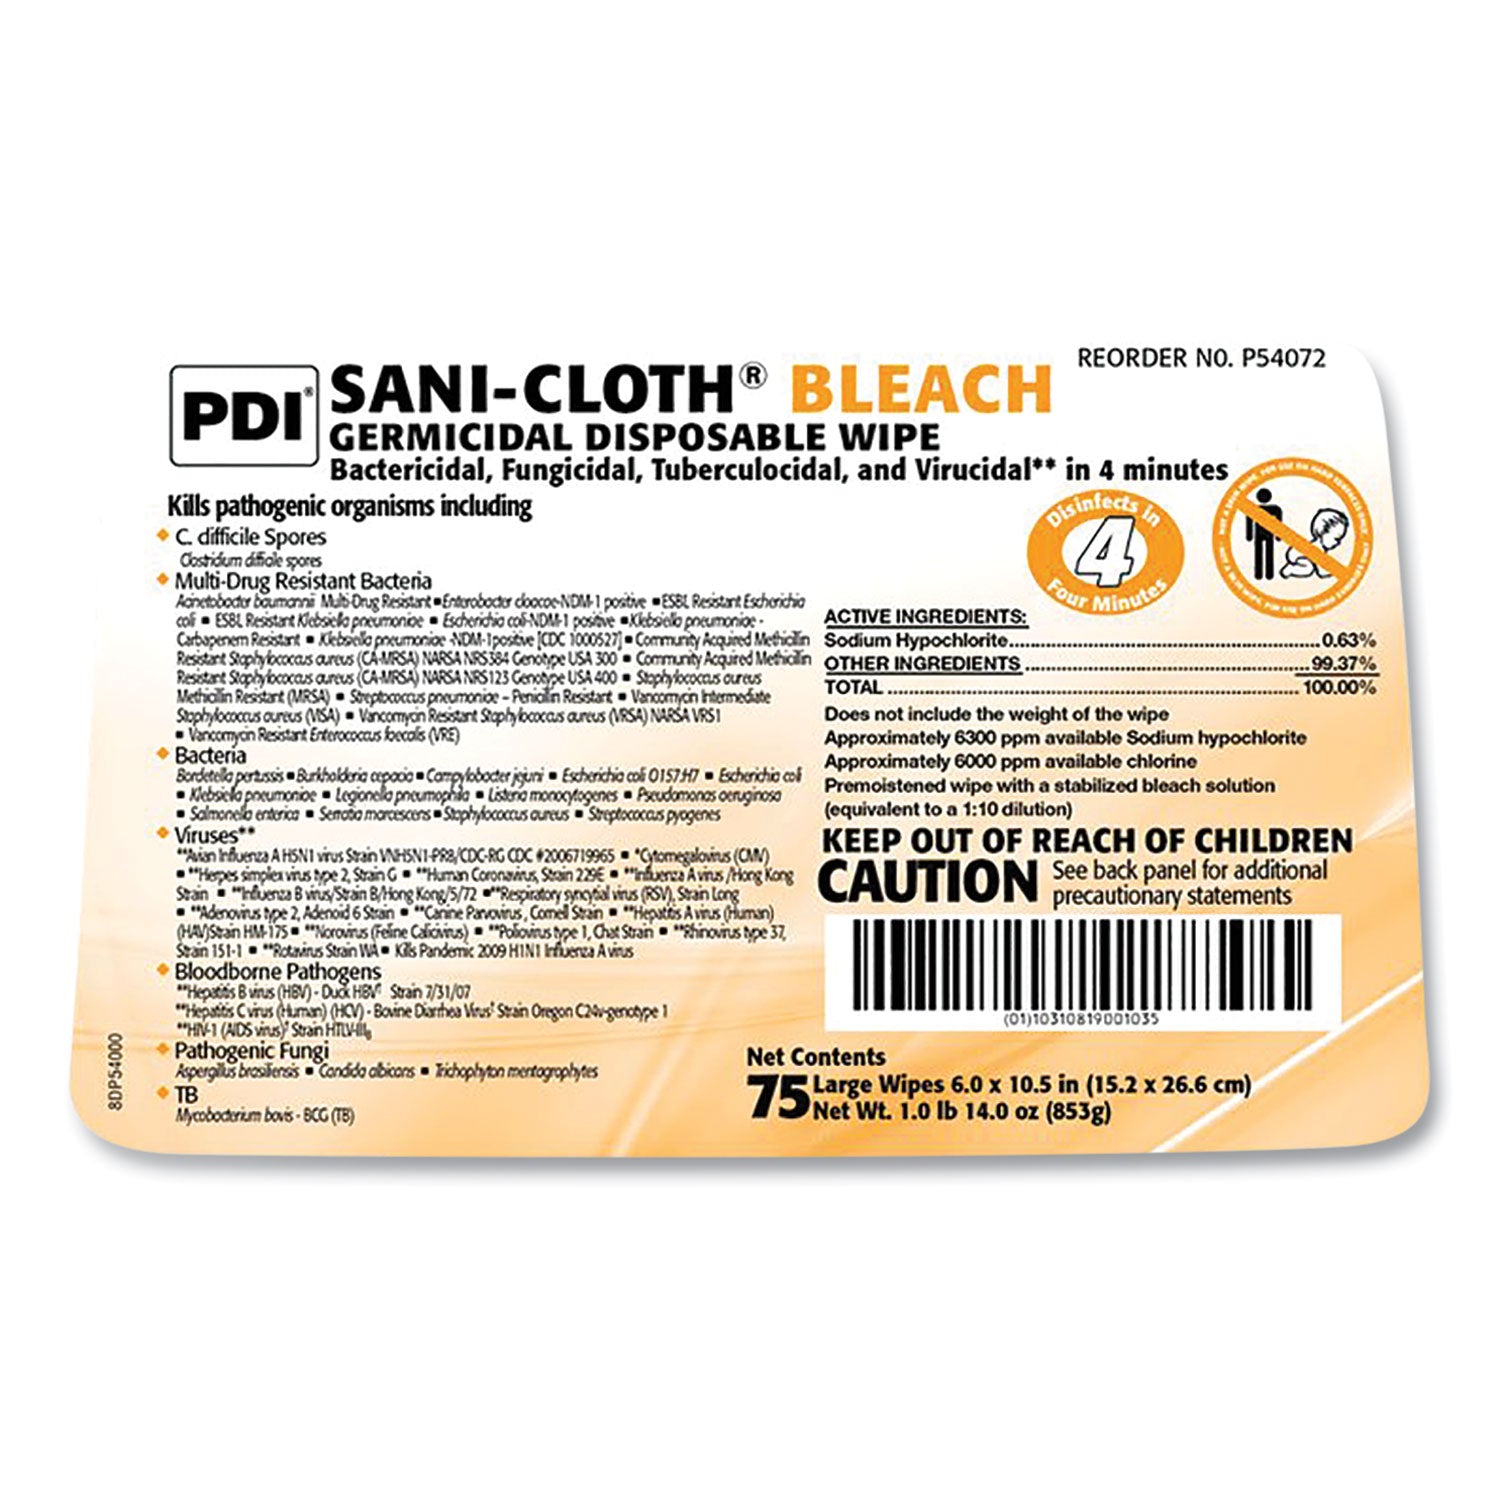 sani-cloth-bleach-germicidal-disposable-wipes-deep-well-lid-canister-105-x-6-75-canister_nicp54072pk - 2